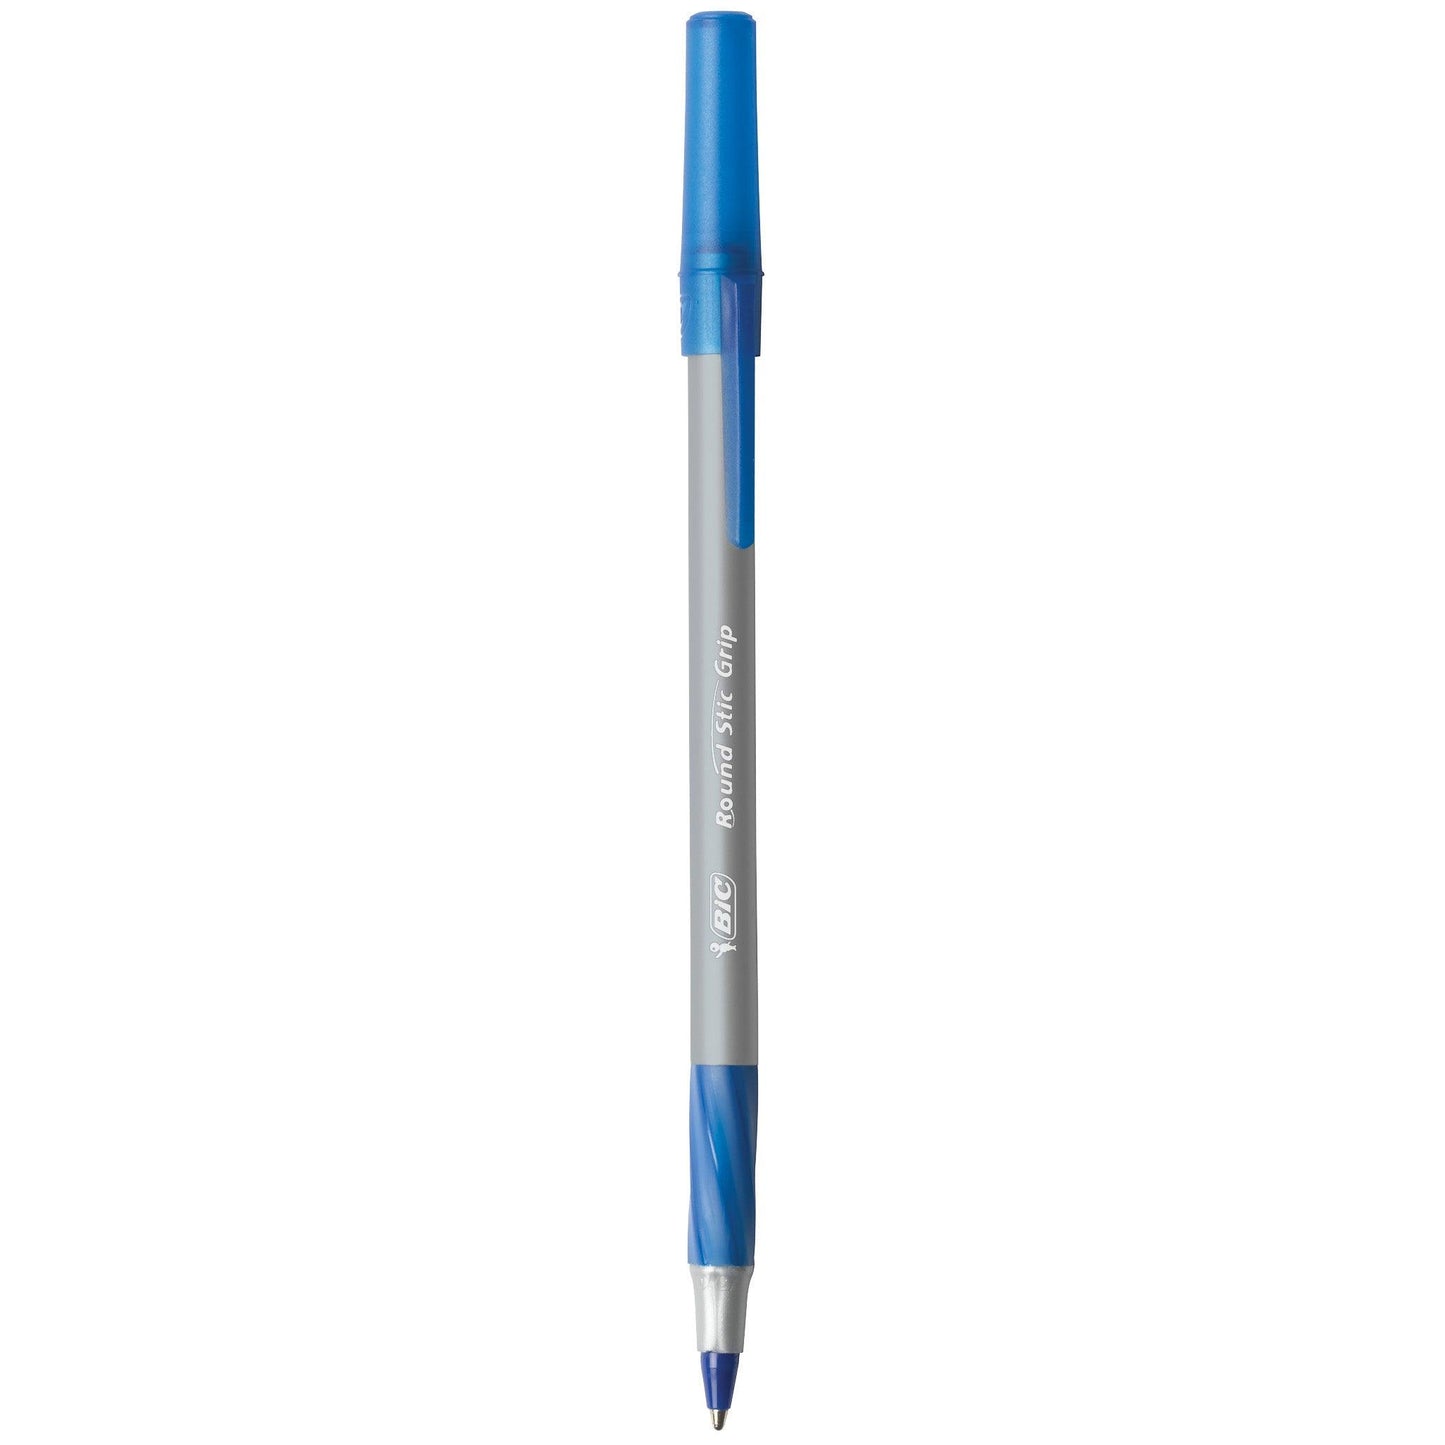 Round Stic Grip Xtra Comfort Ballpoint Pens, Medium Point (1.2mm), Assorted Colors, 36 Per Pack, 3 Packs - Loomini